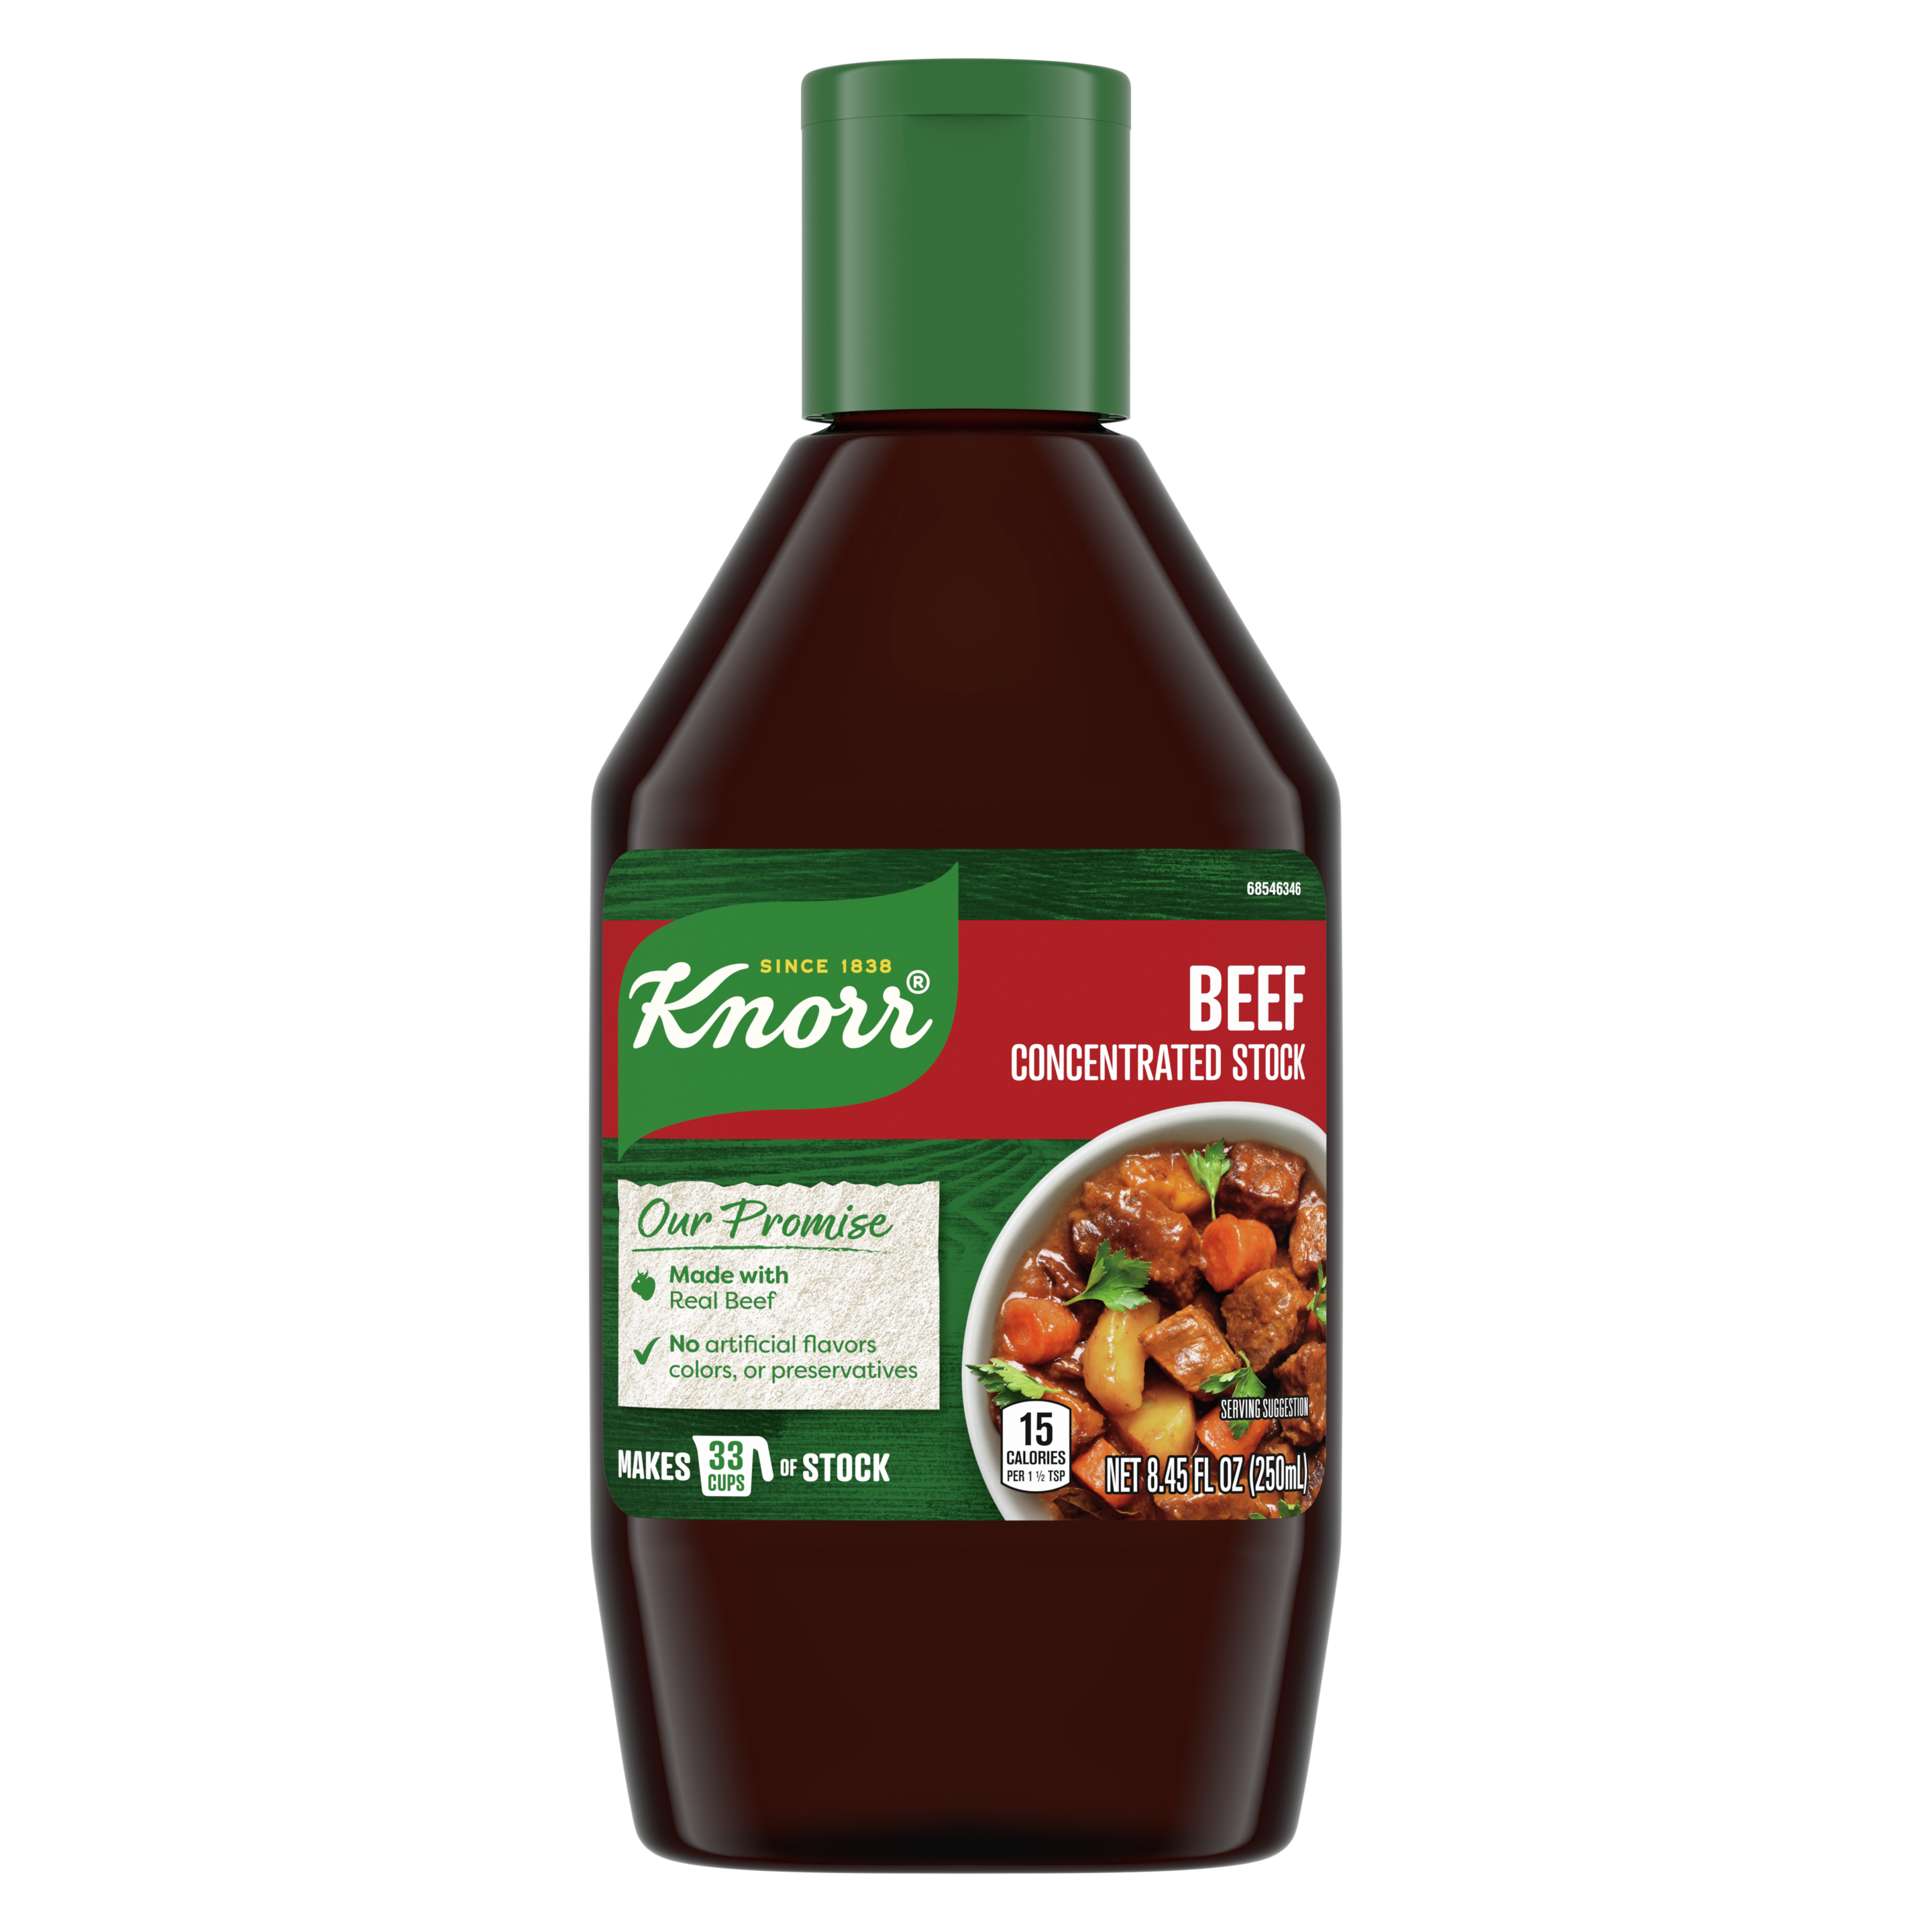 Knorr Beef Concentrated Stock FOP